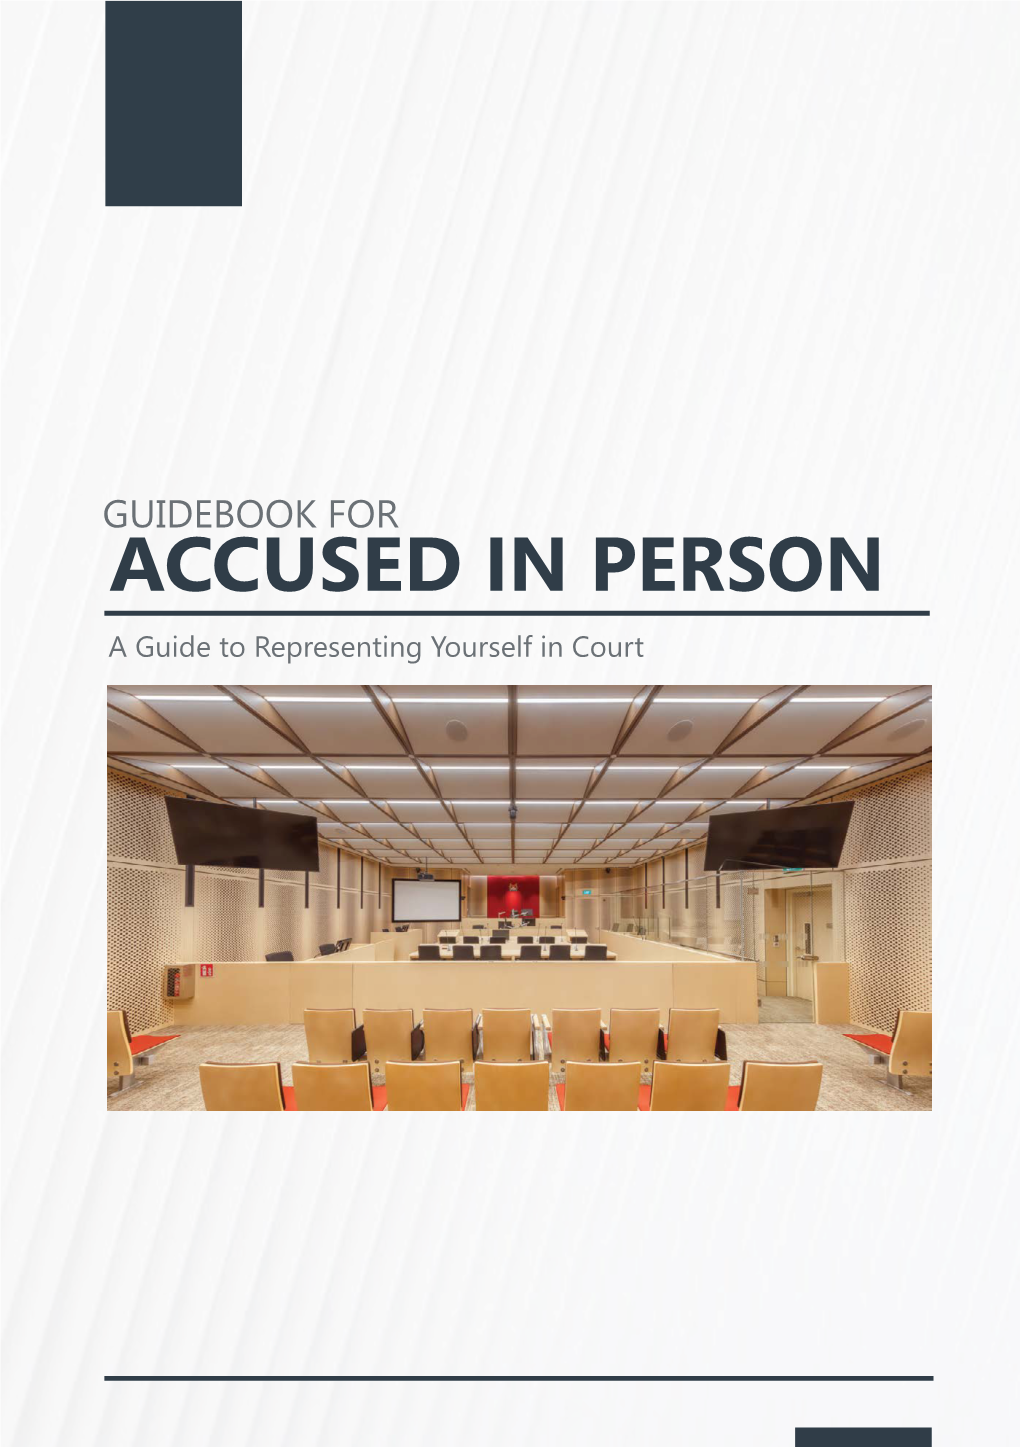 GUIDEBOOK for ACCUSED in PERSON a Guide to Representing Yourself in Court